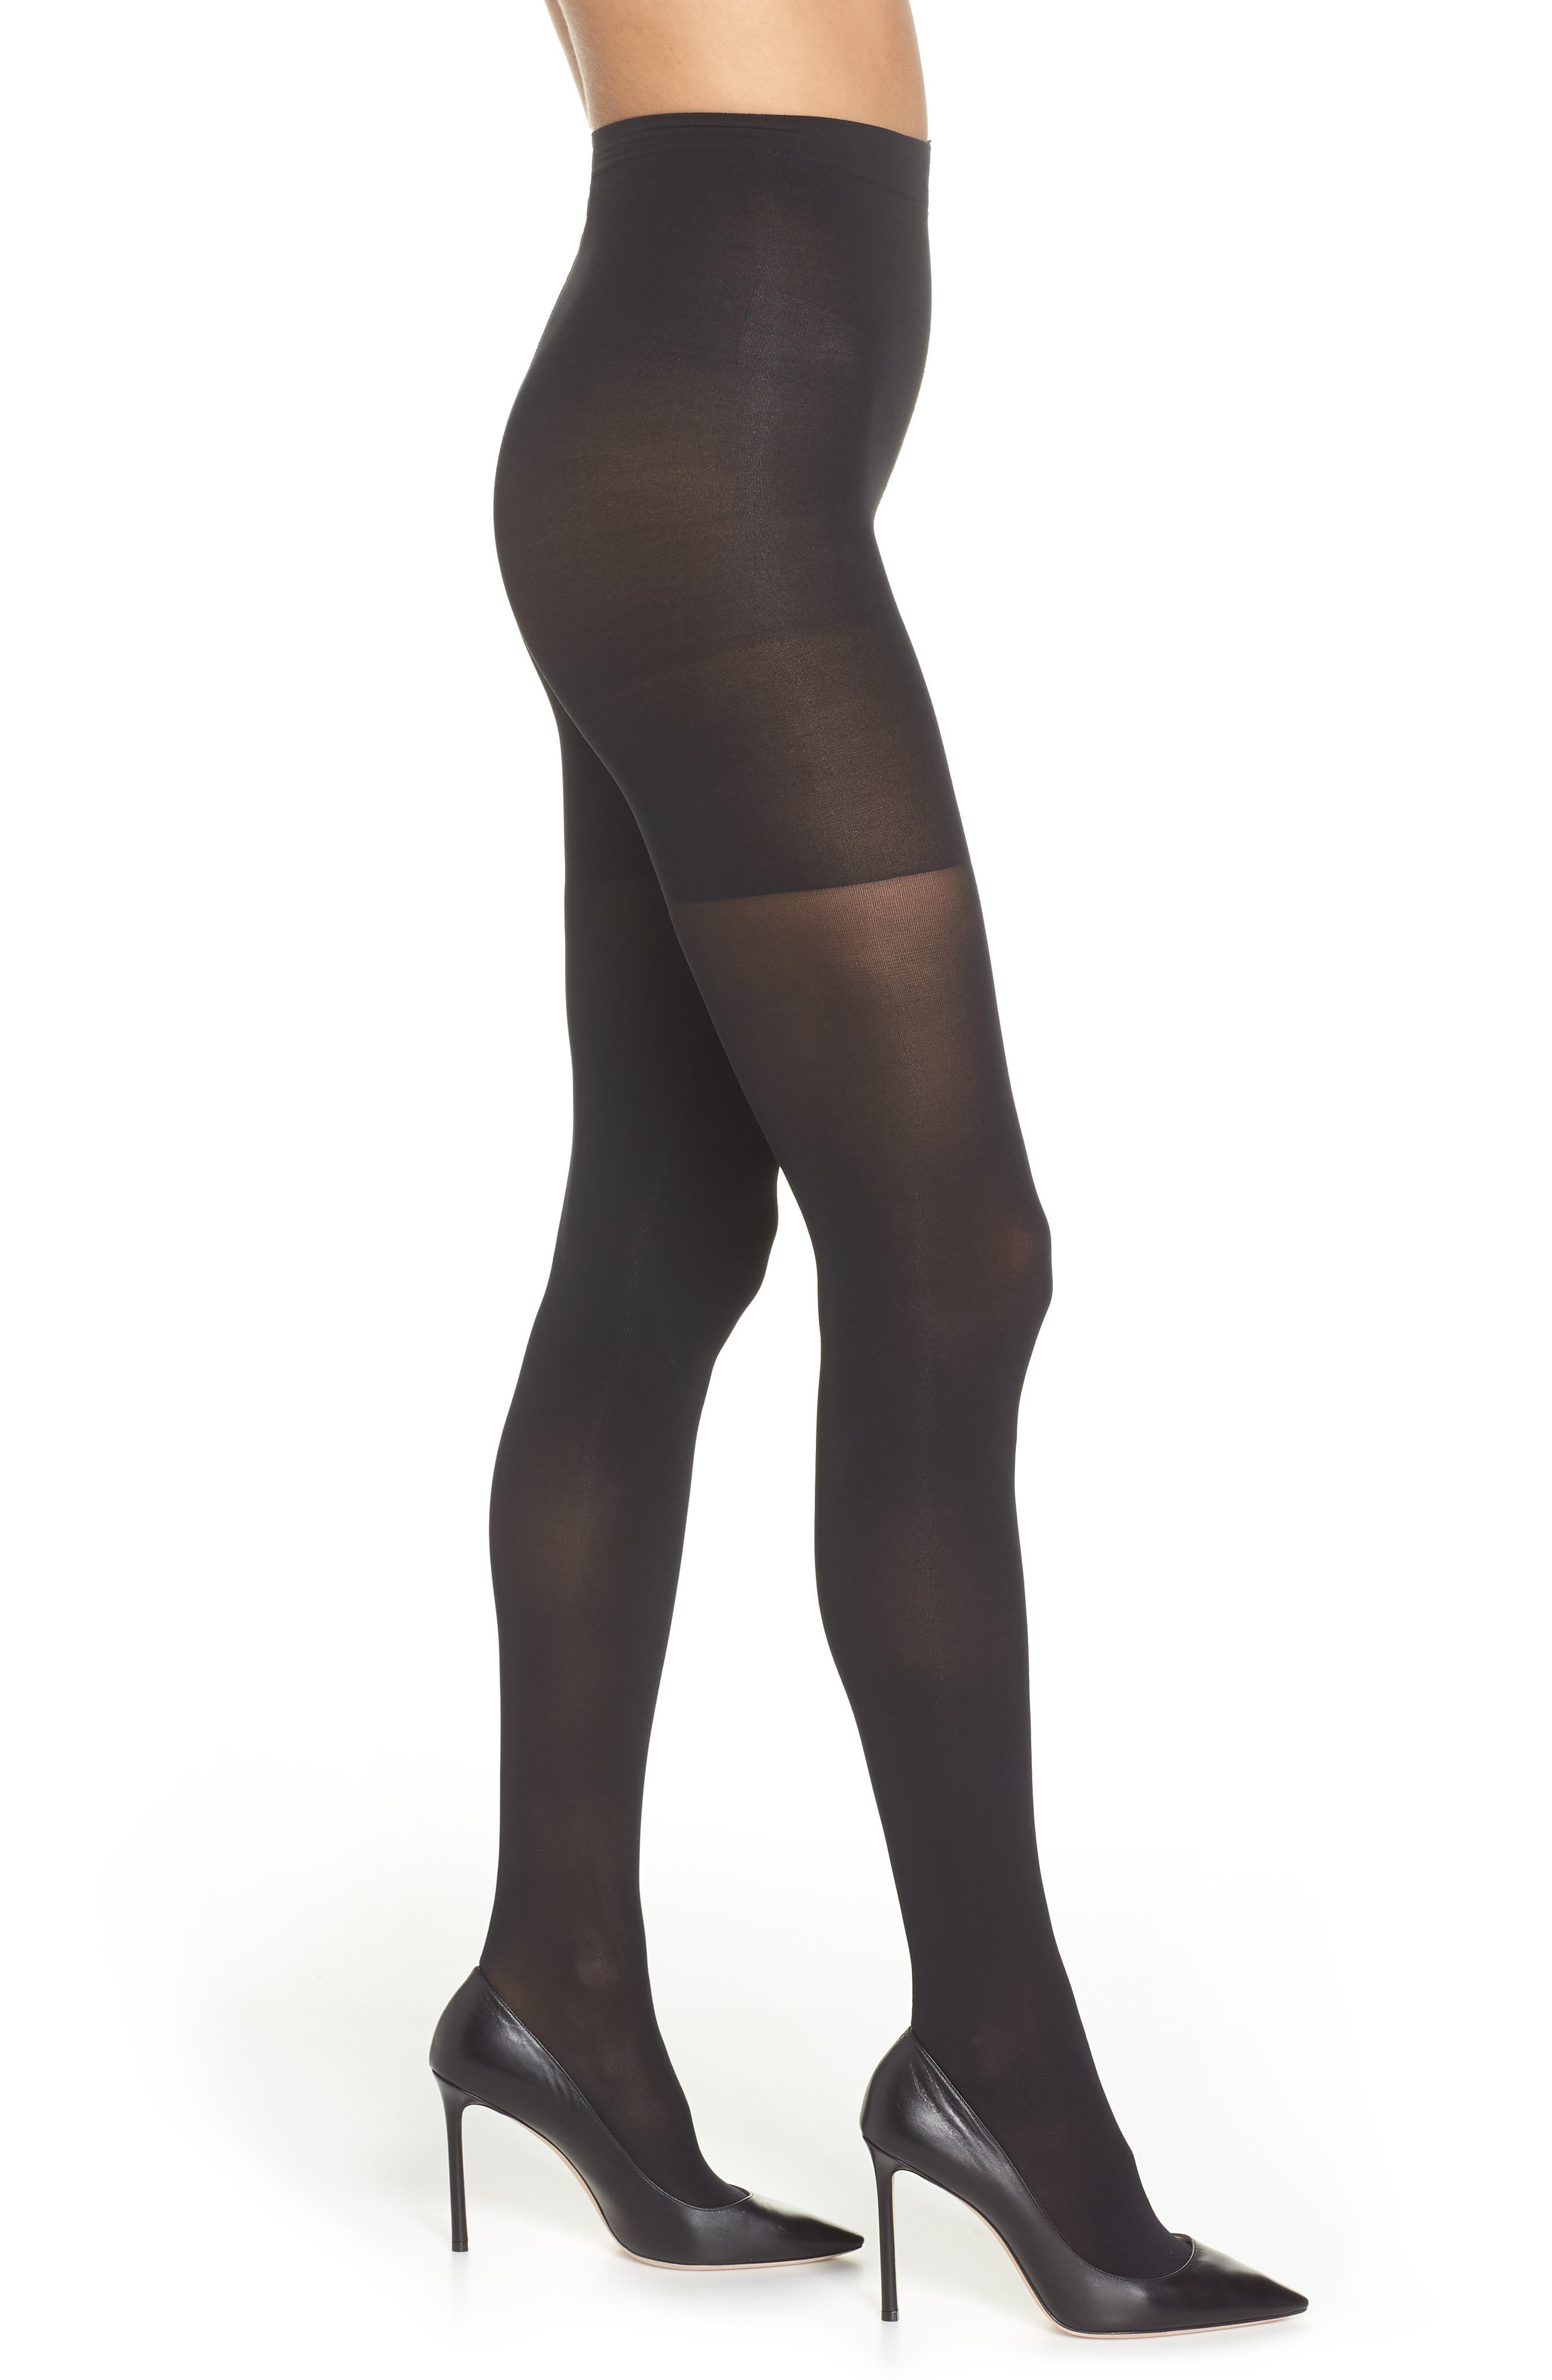 Women Control Top Pantyhose With Run Light Support Legs Sheer